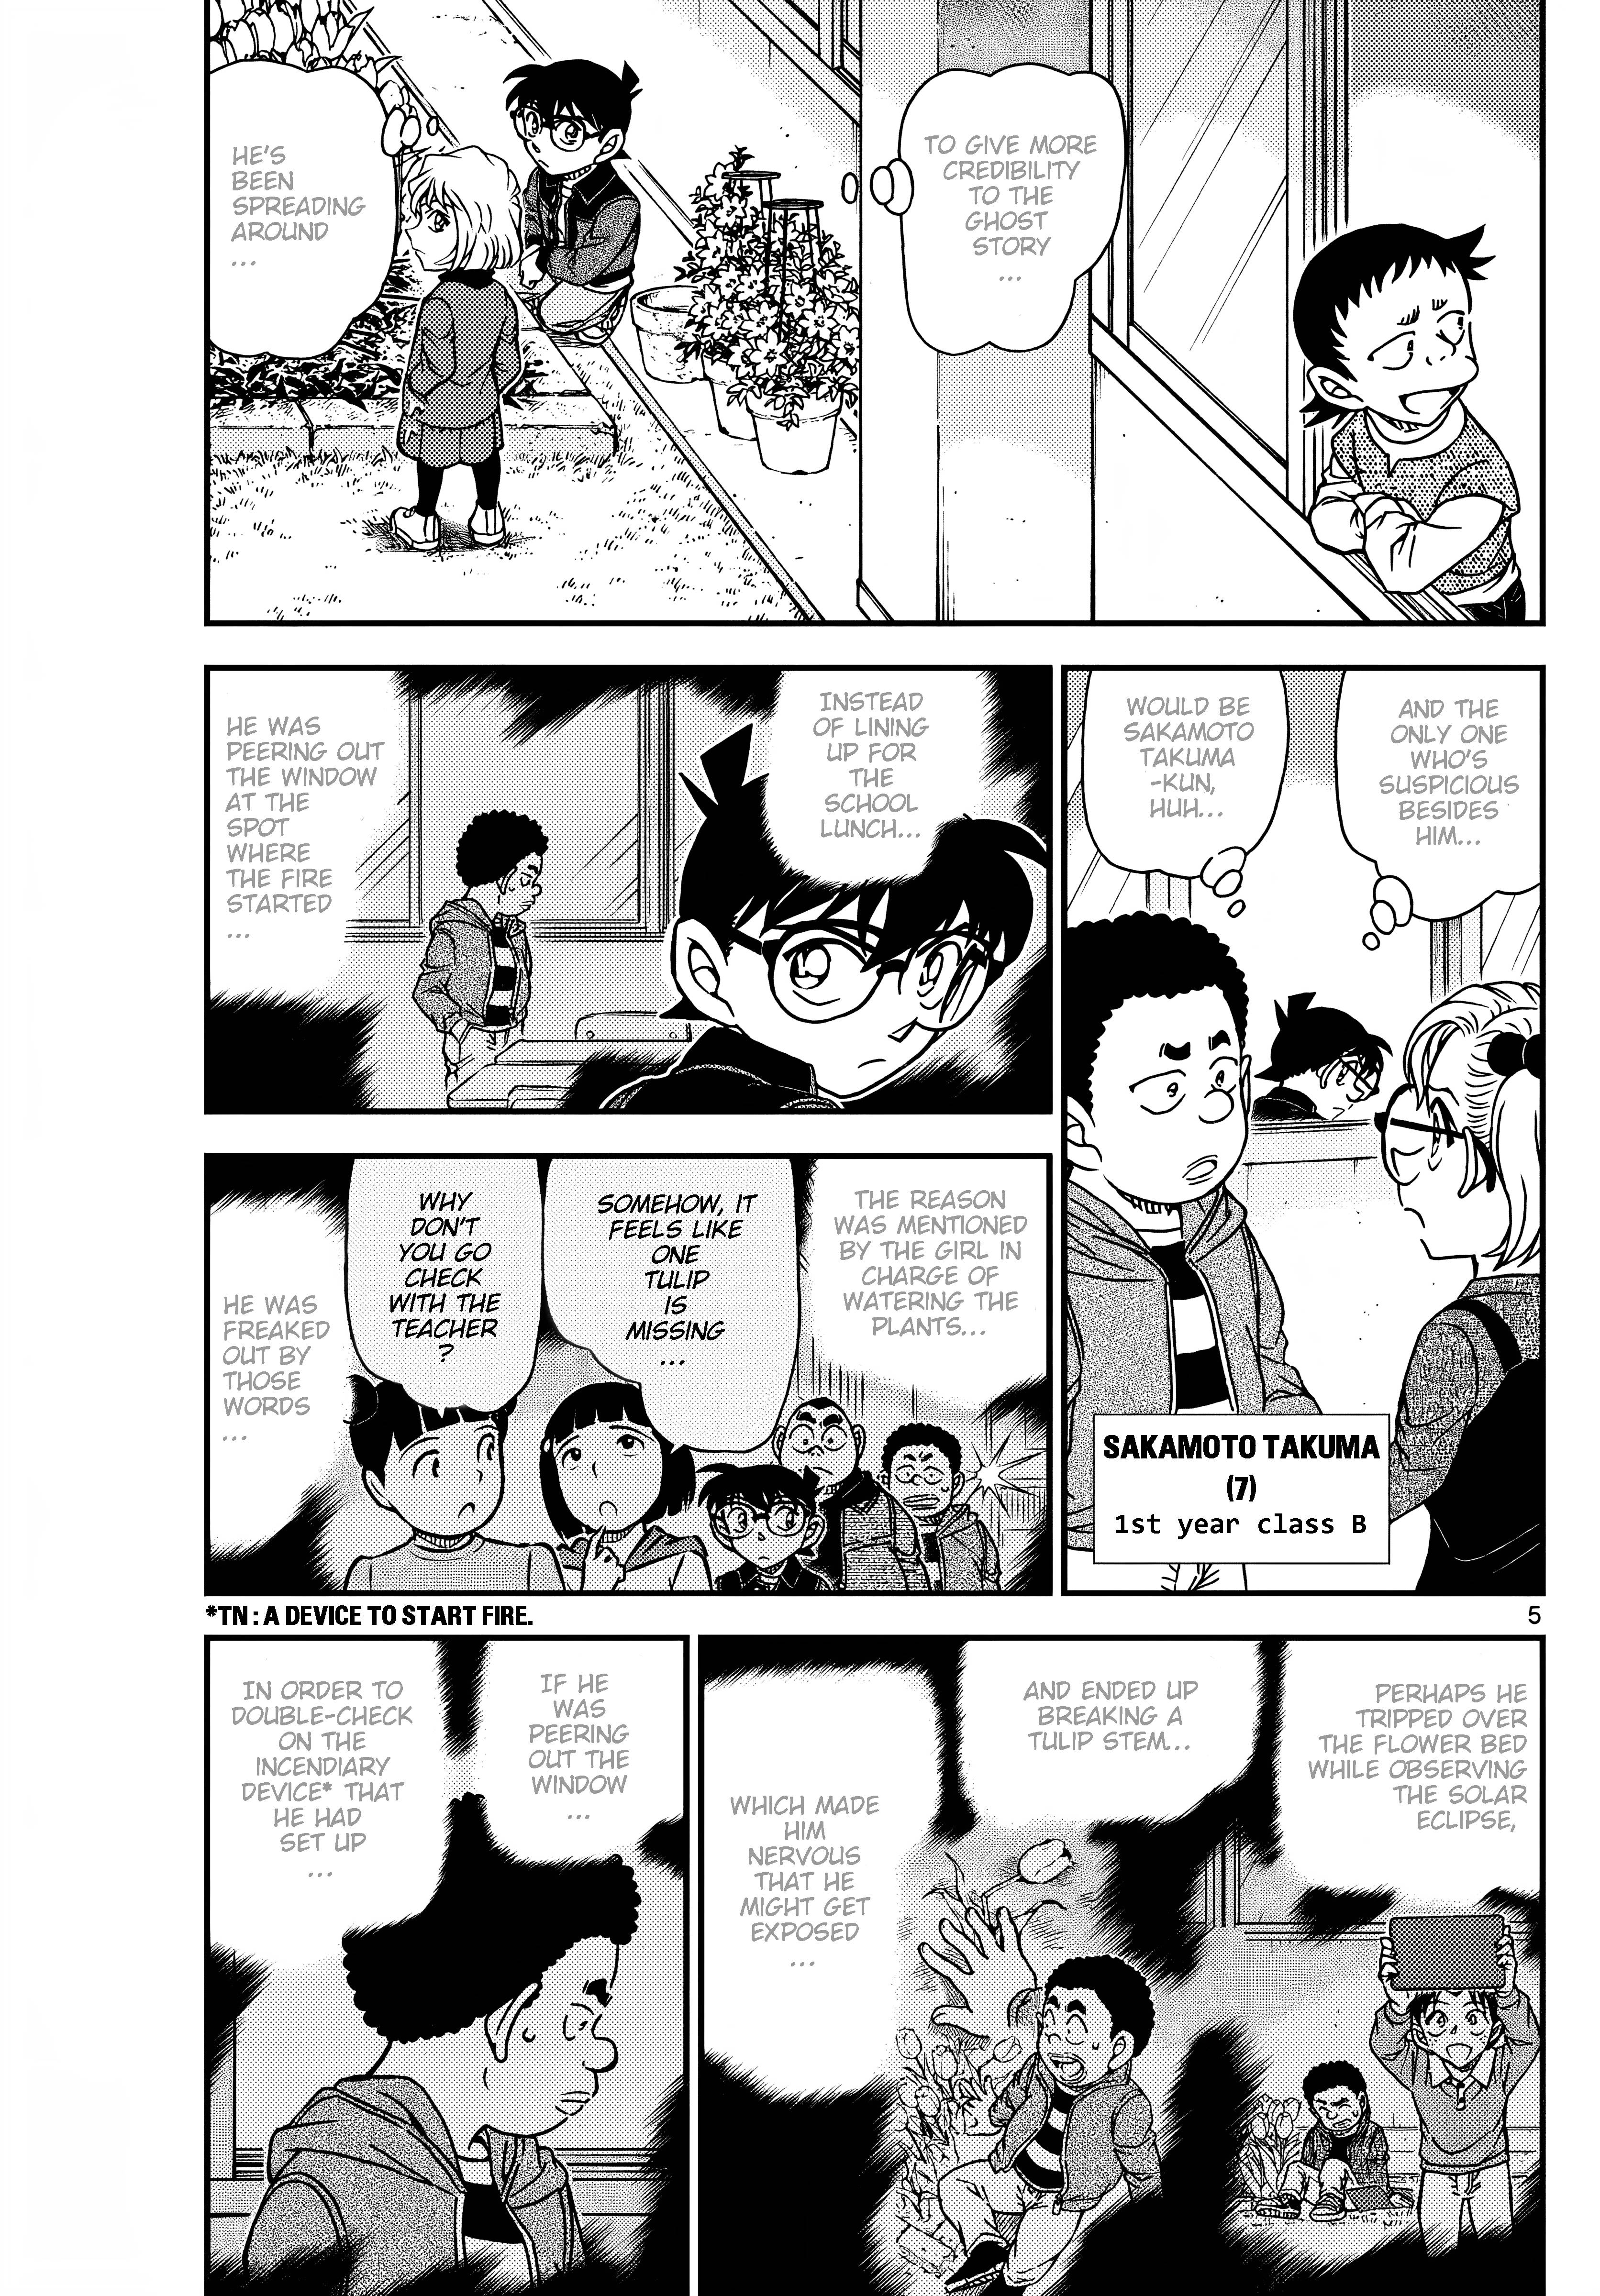 Detective Conan chapter 1111 page 7